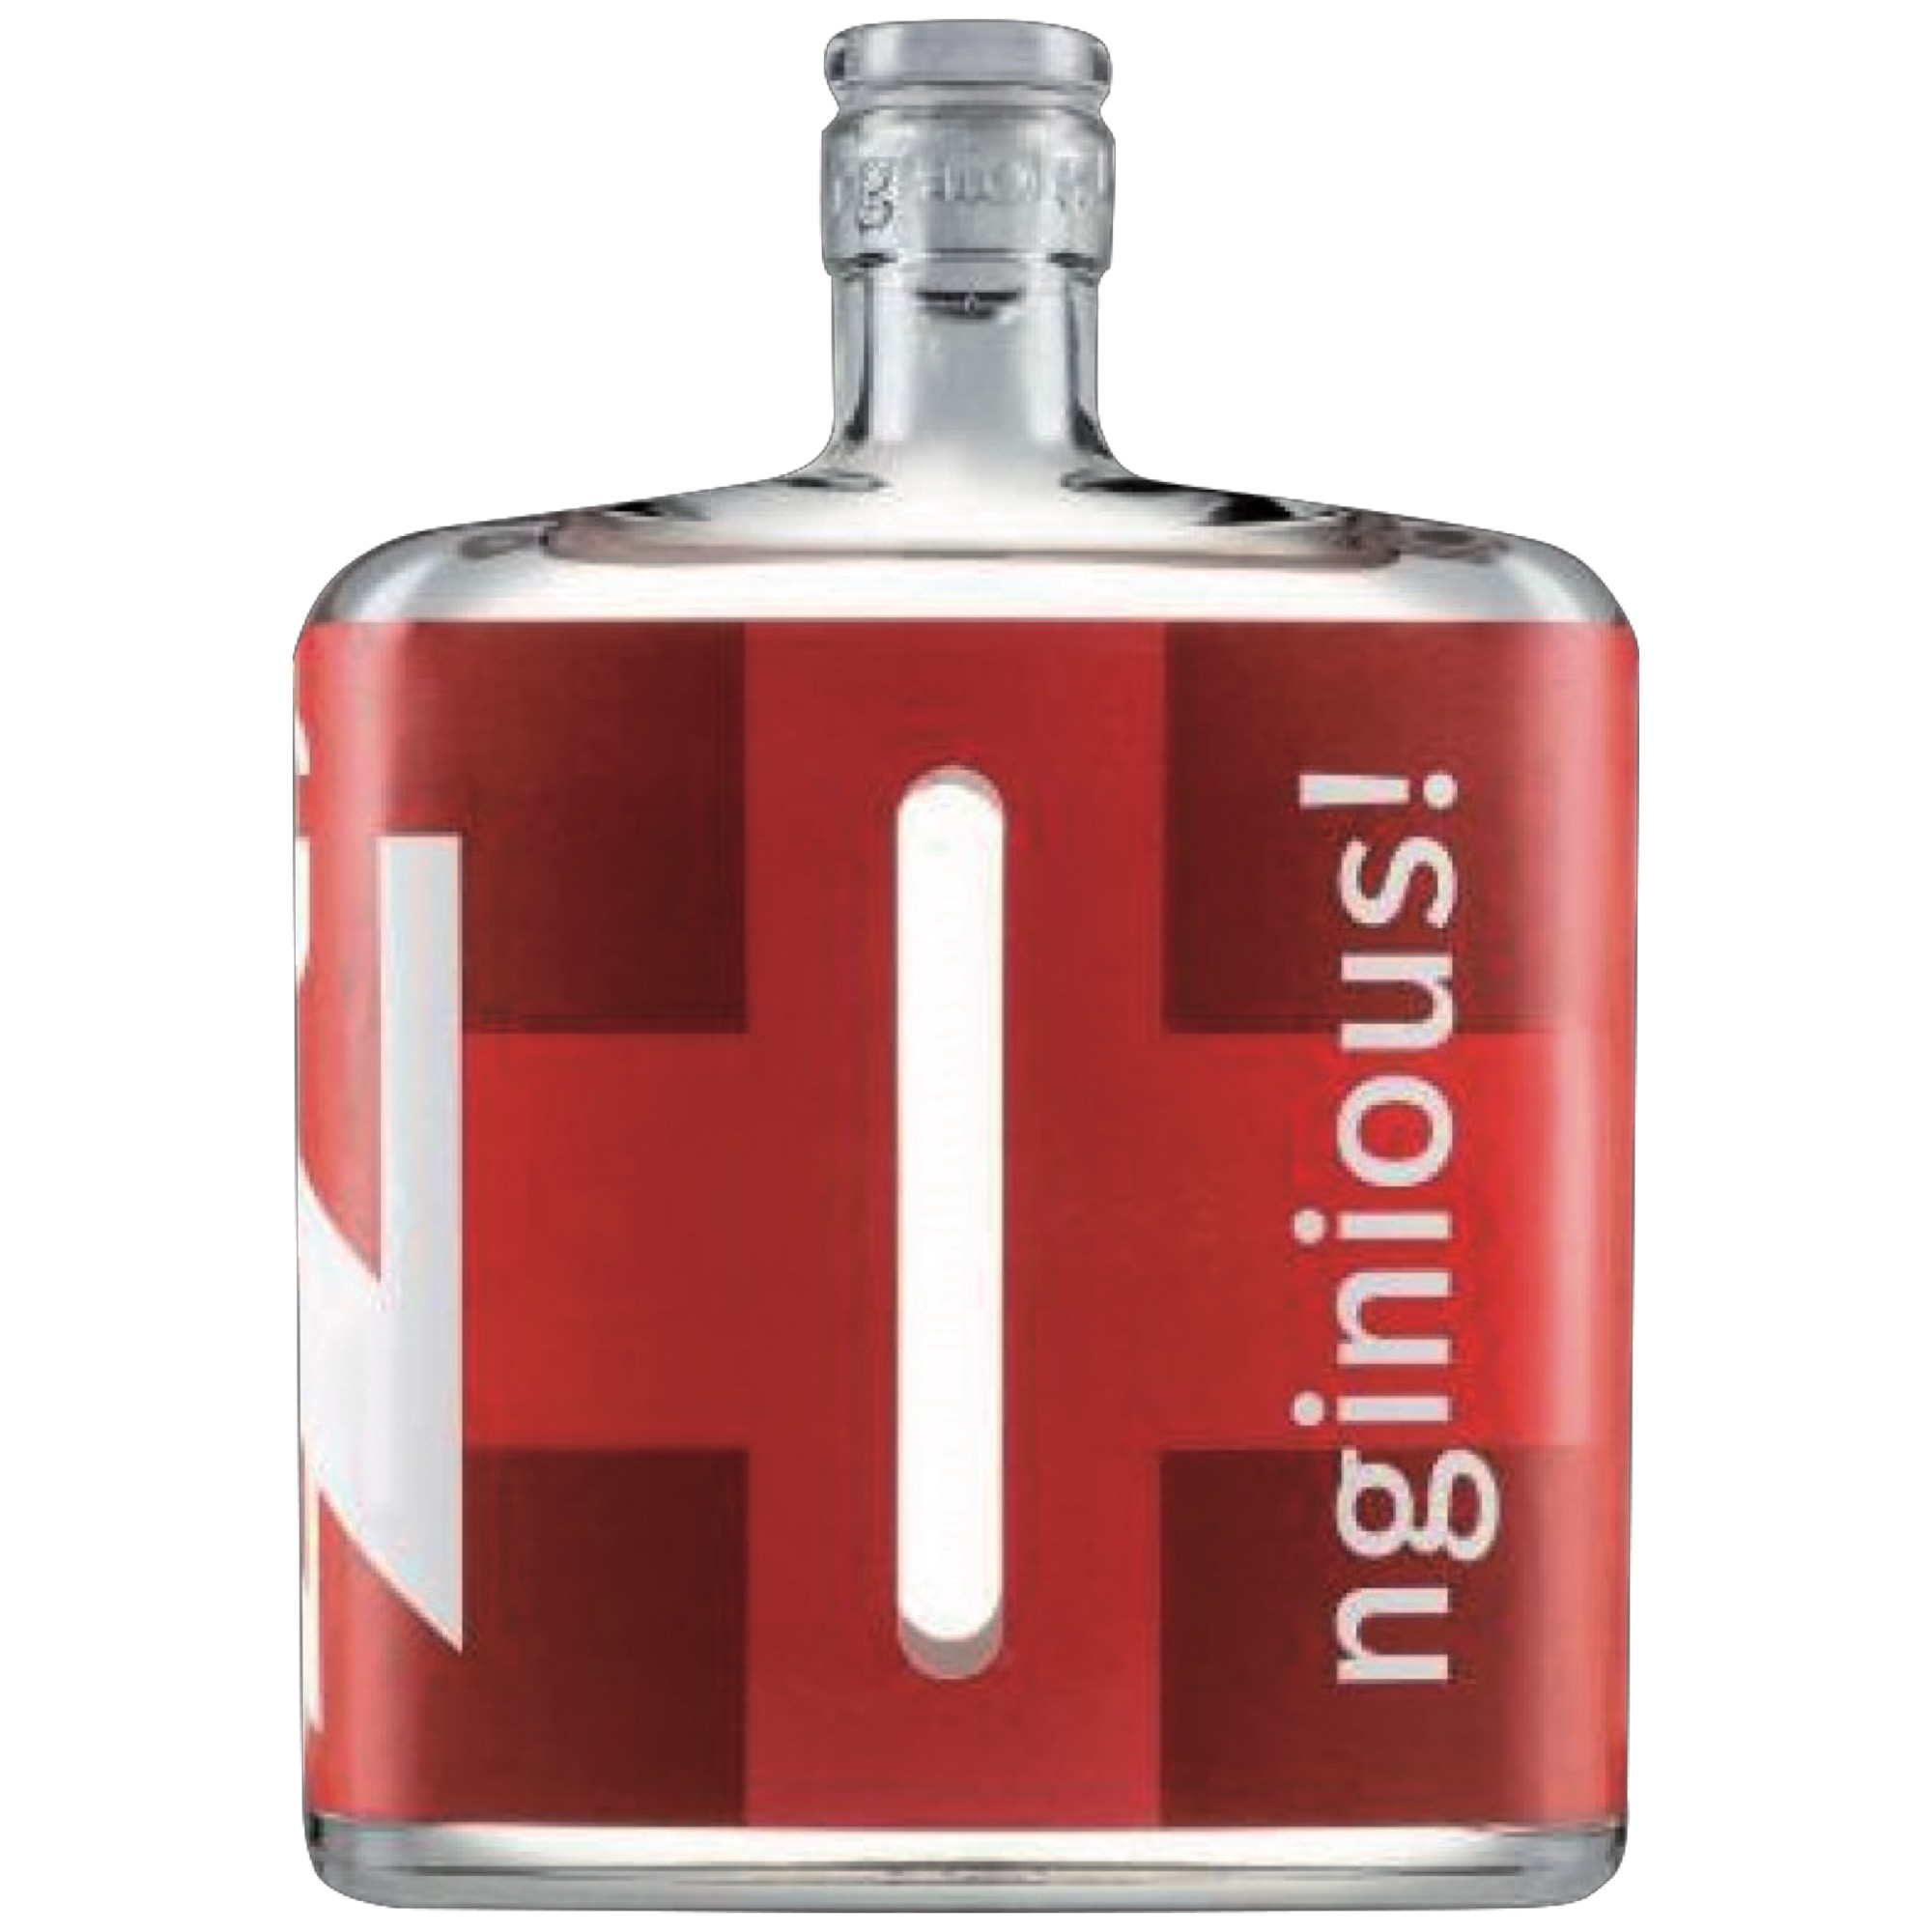 Nginious! Swiss Blended Gin 0,5l